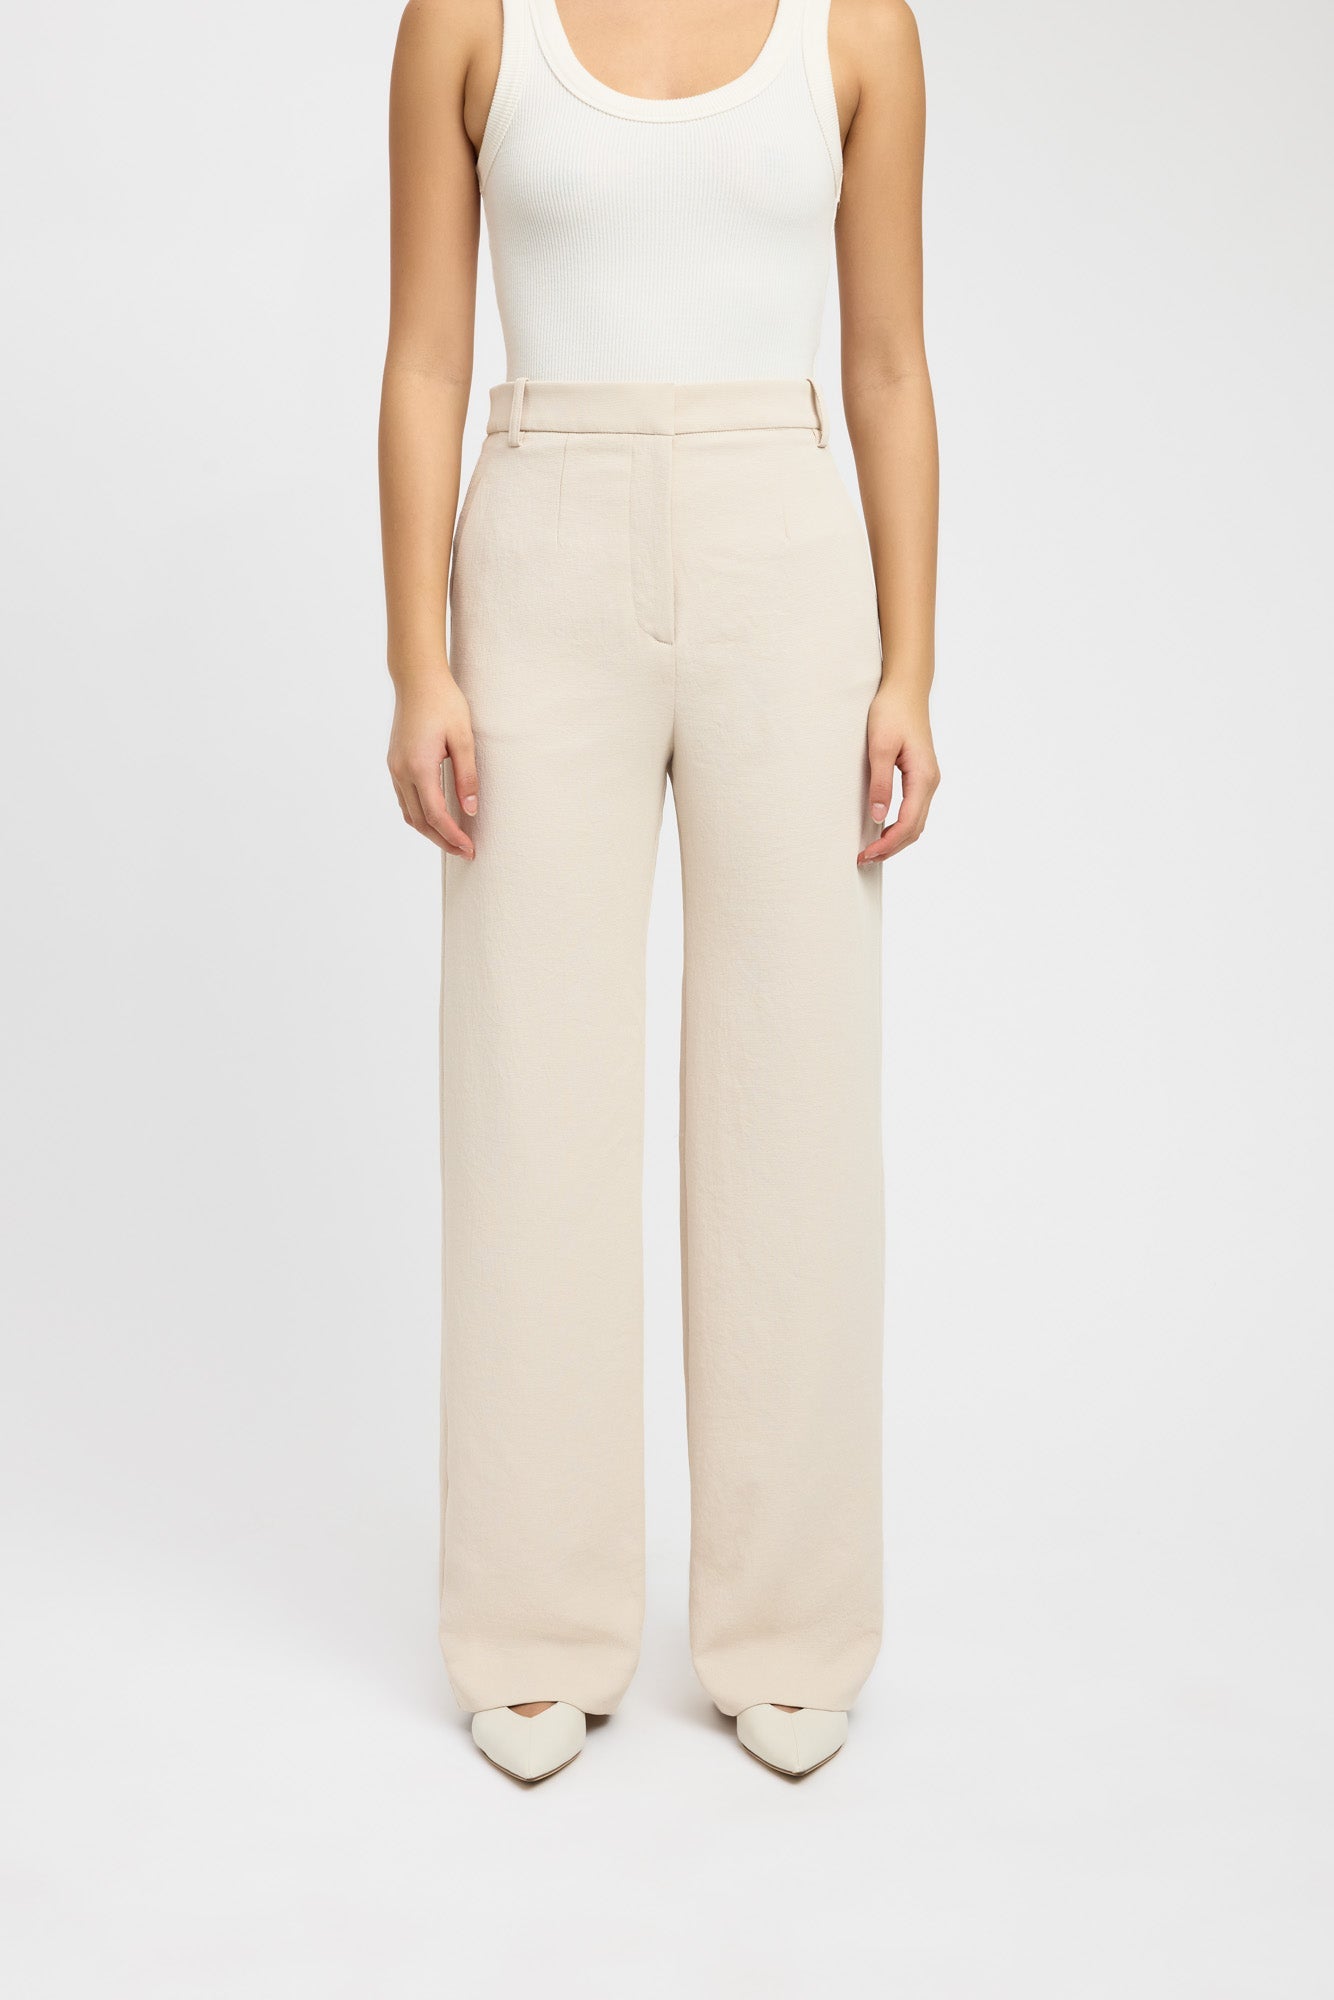 Buy Oyster Tailored Pant Natural White Online